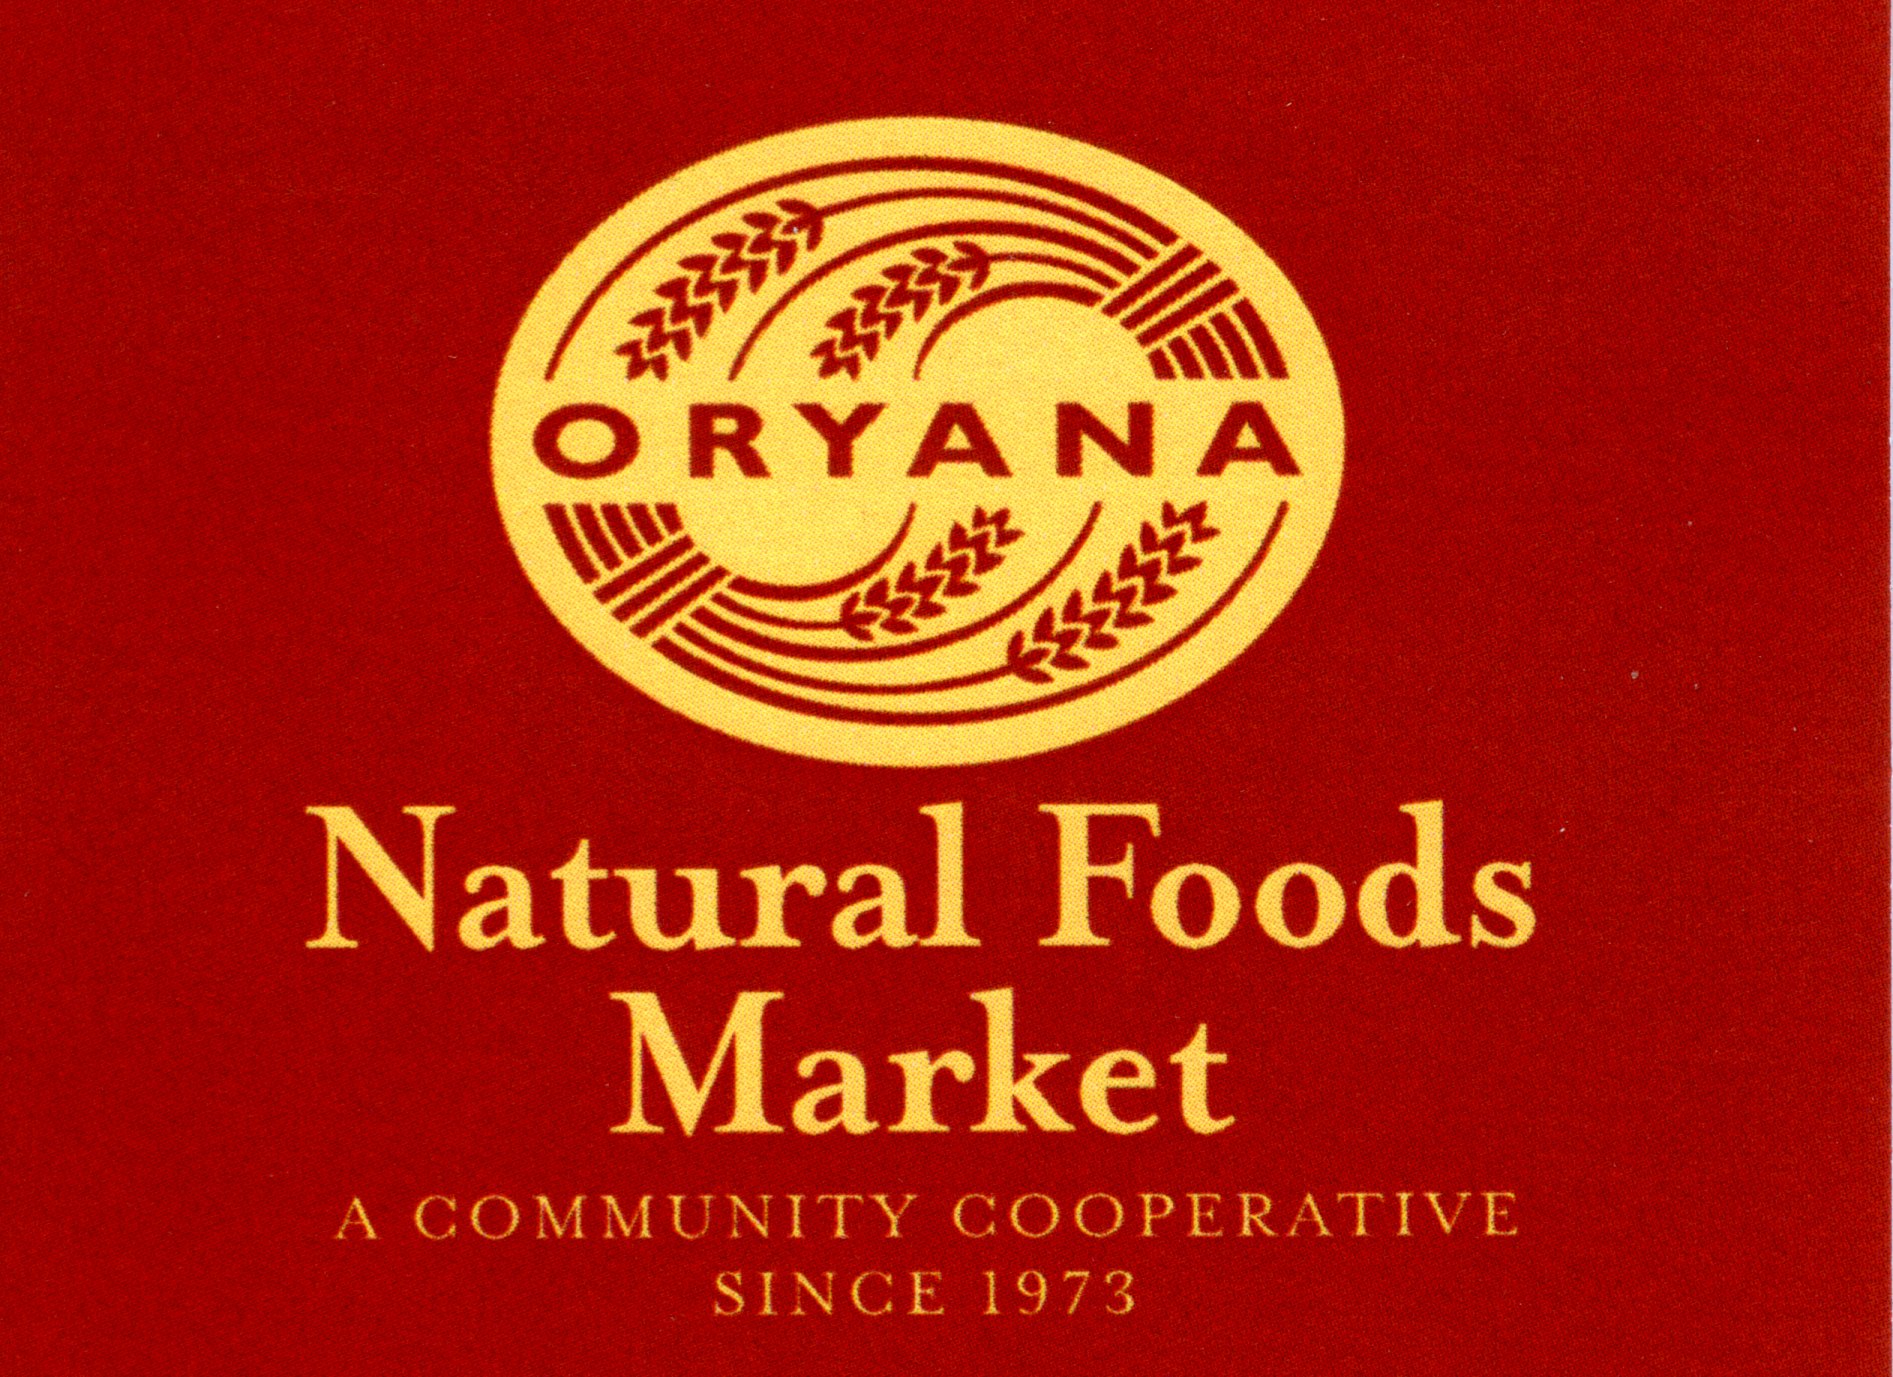 We at Oryana support and work for clean, environmentally positive efforts for our community.